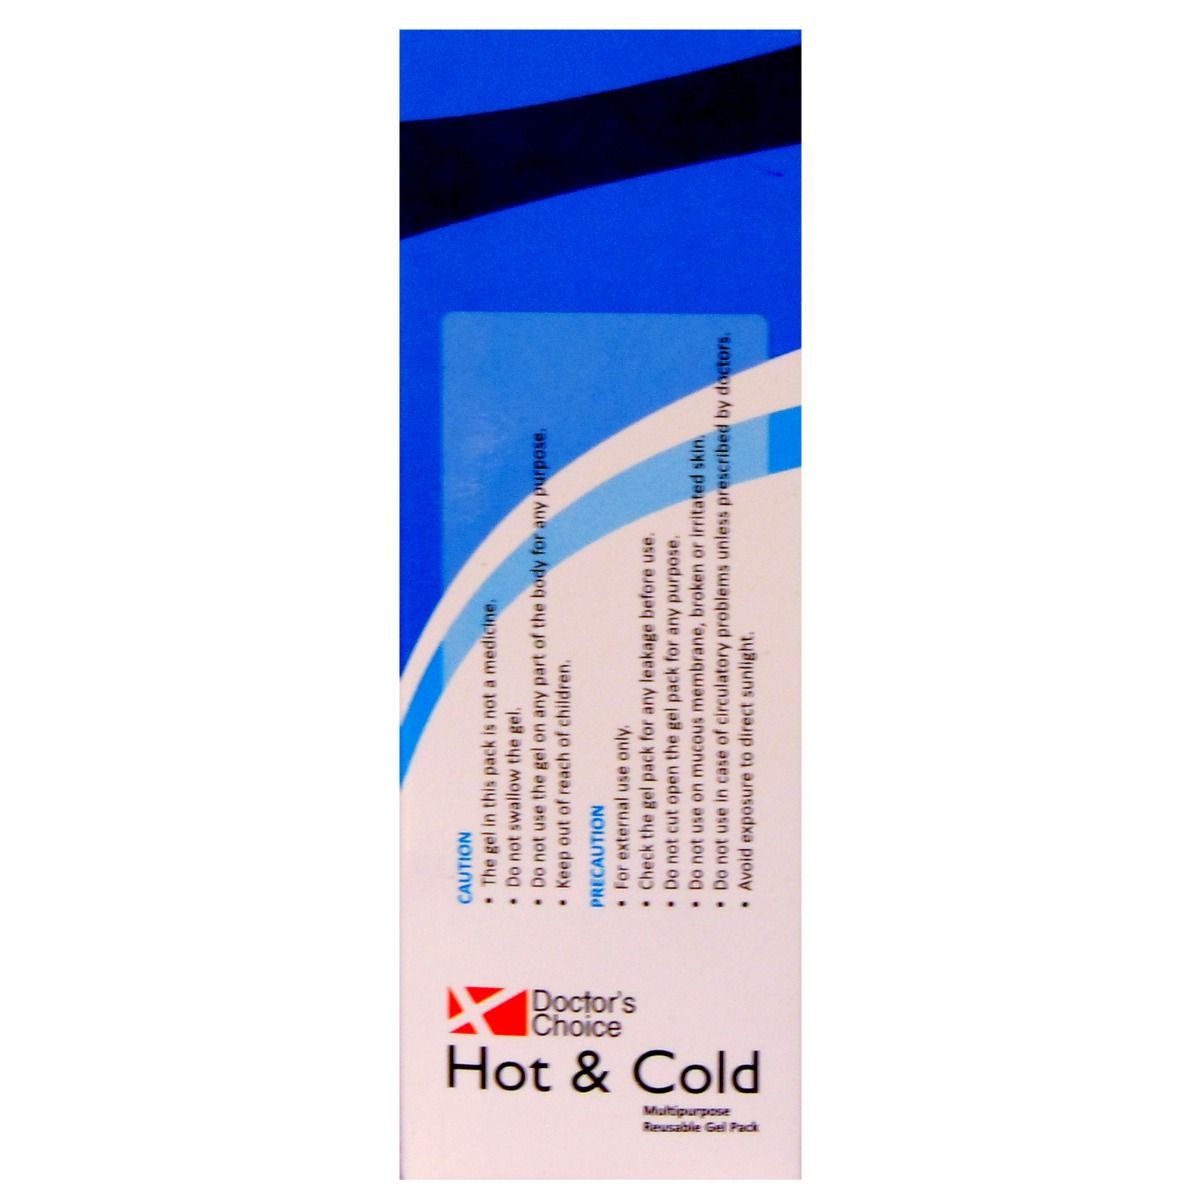 Doctor's Choice Hot & Cold Gel Pack Medium, 1 Count, Pack of 1 